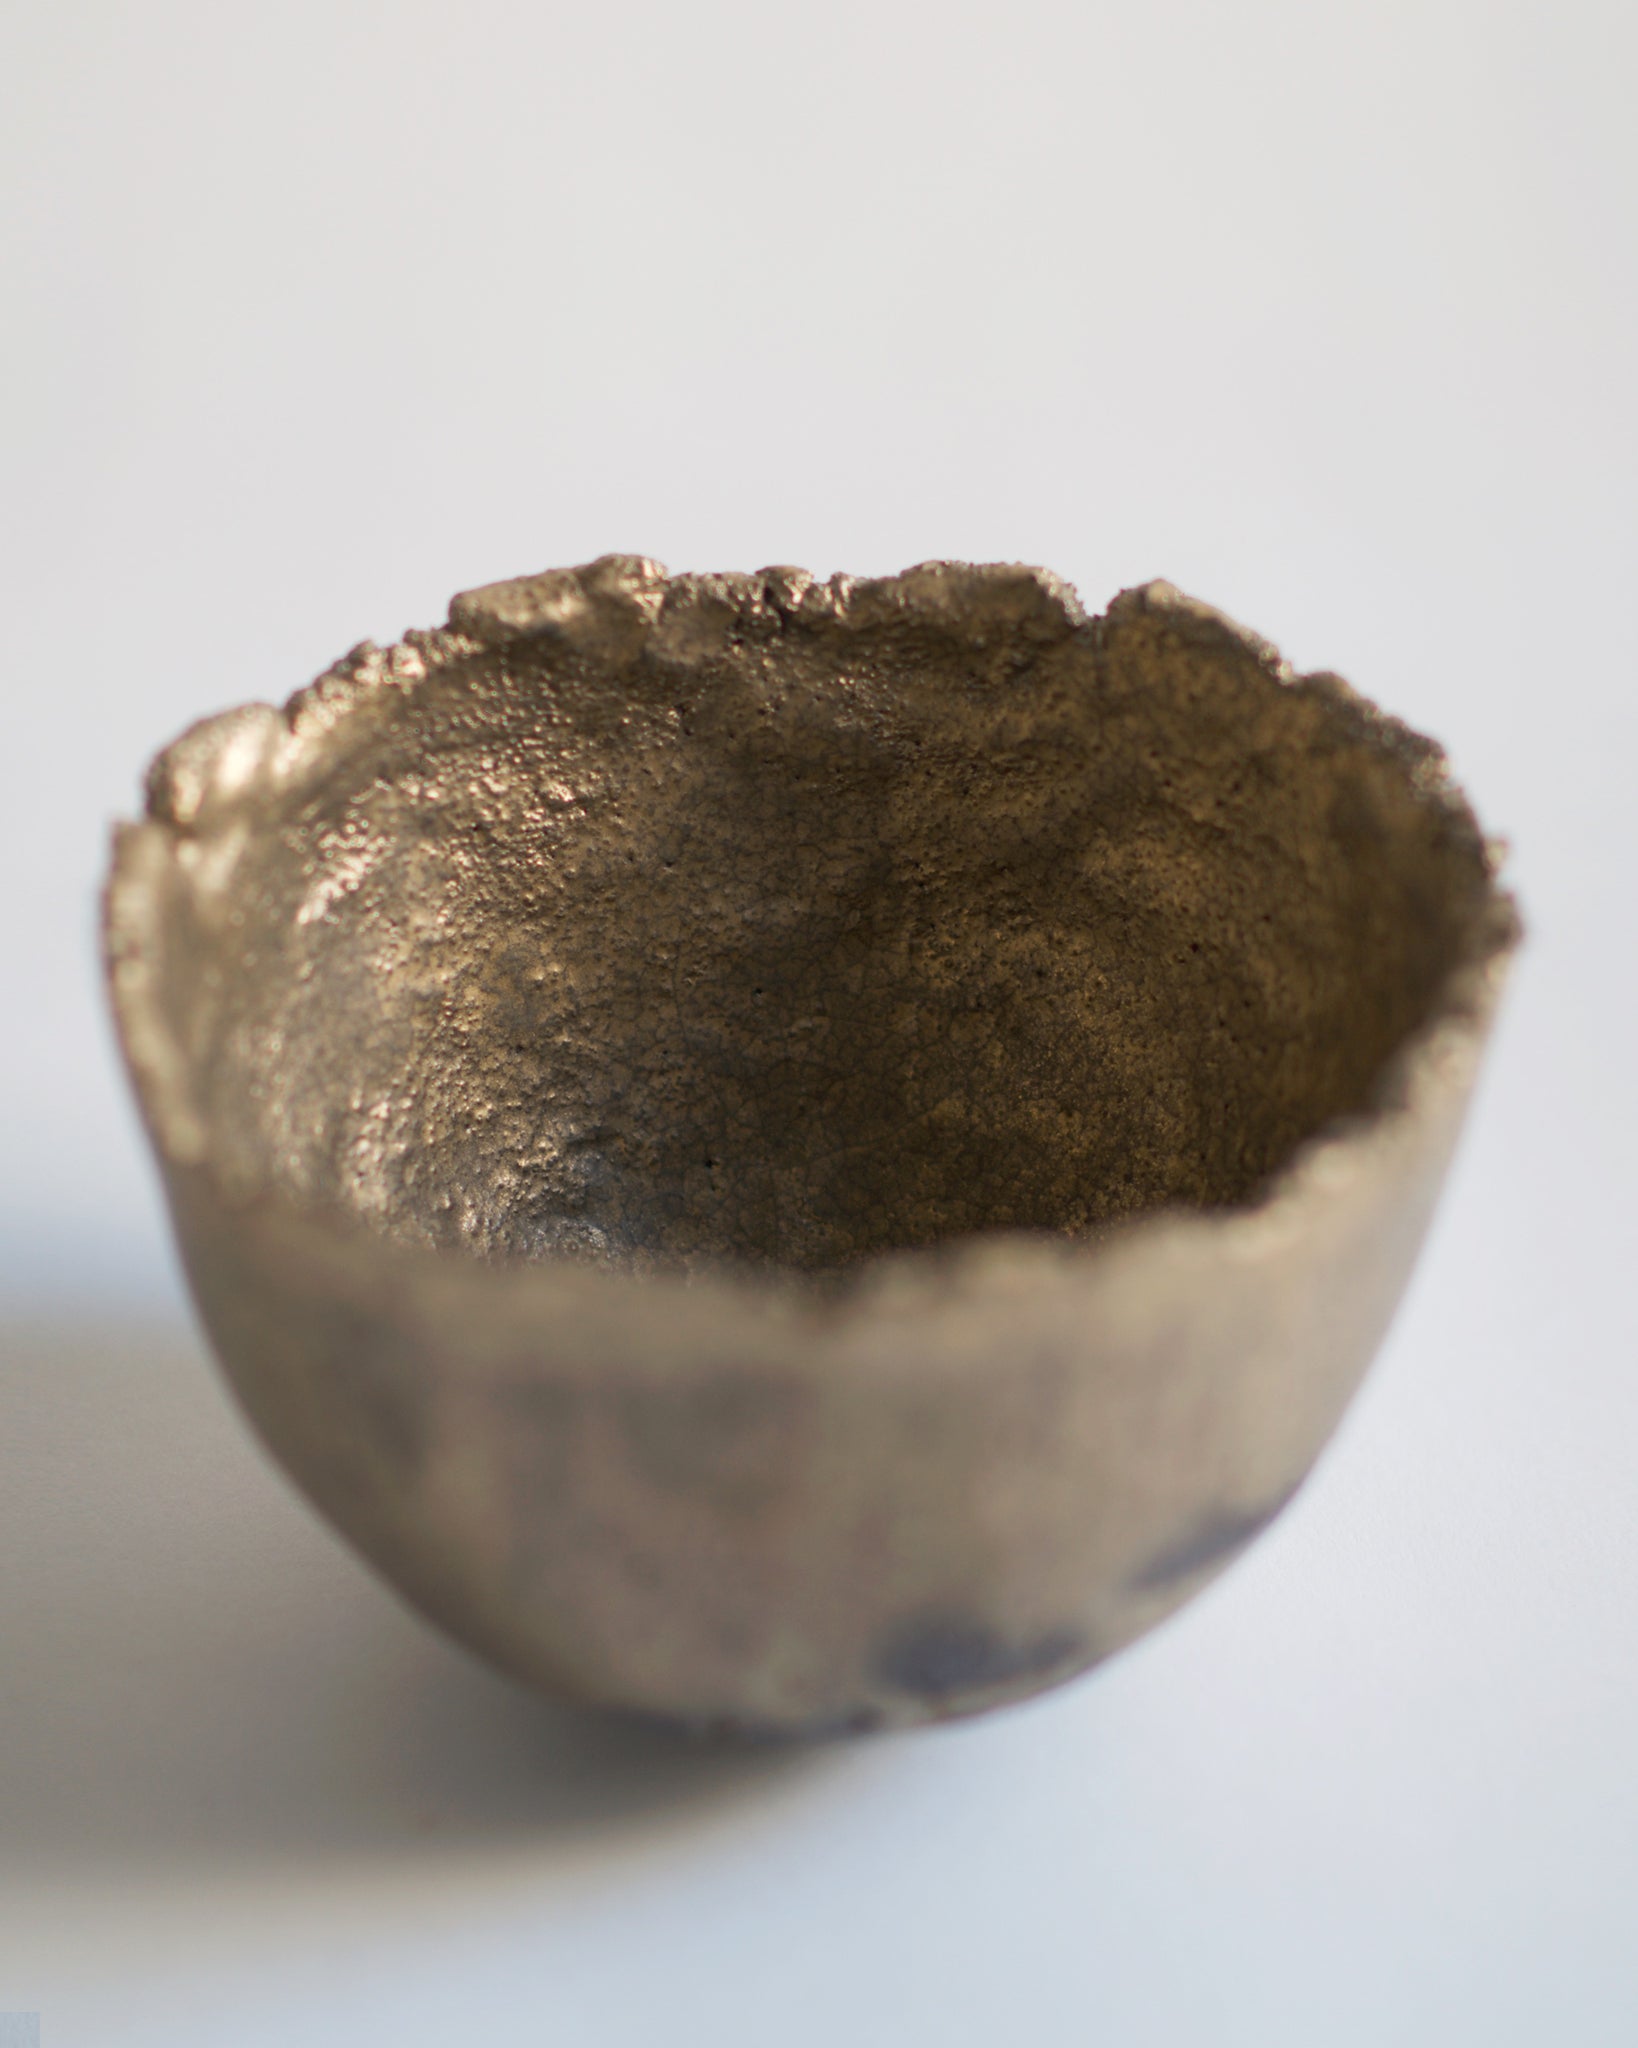 Detailed Gold Chawan IV silhouetted against gray background.